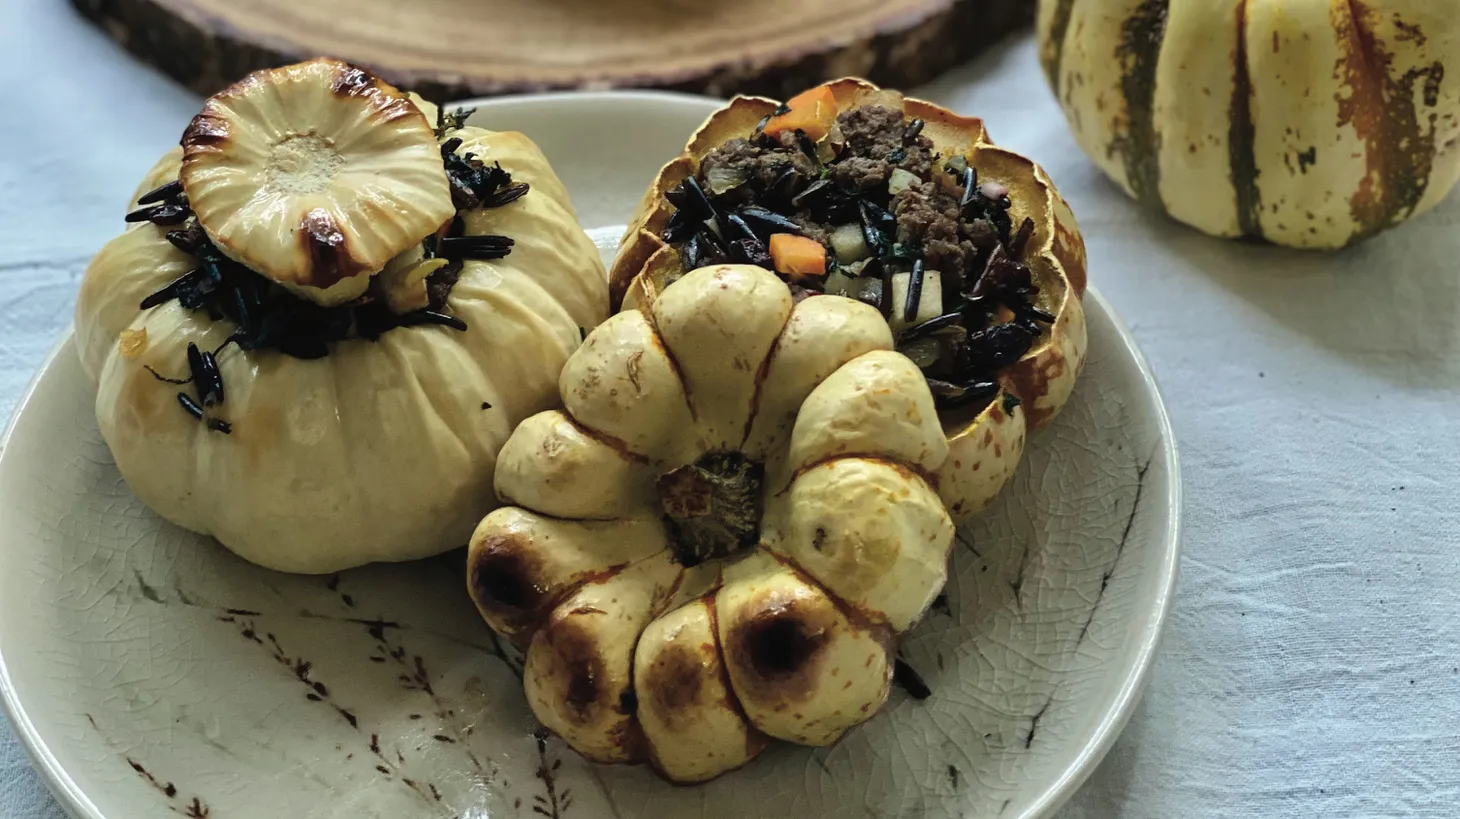 In the fall, mini pumpkins are stuffed with venison to celebrate the Karuk new year.